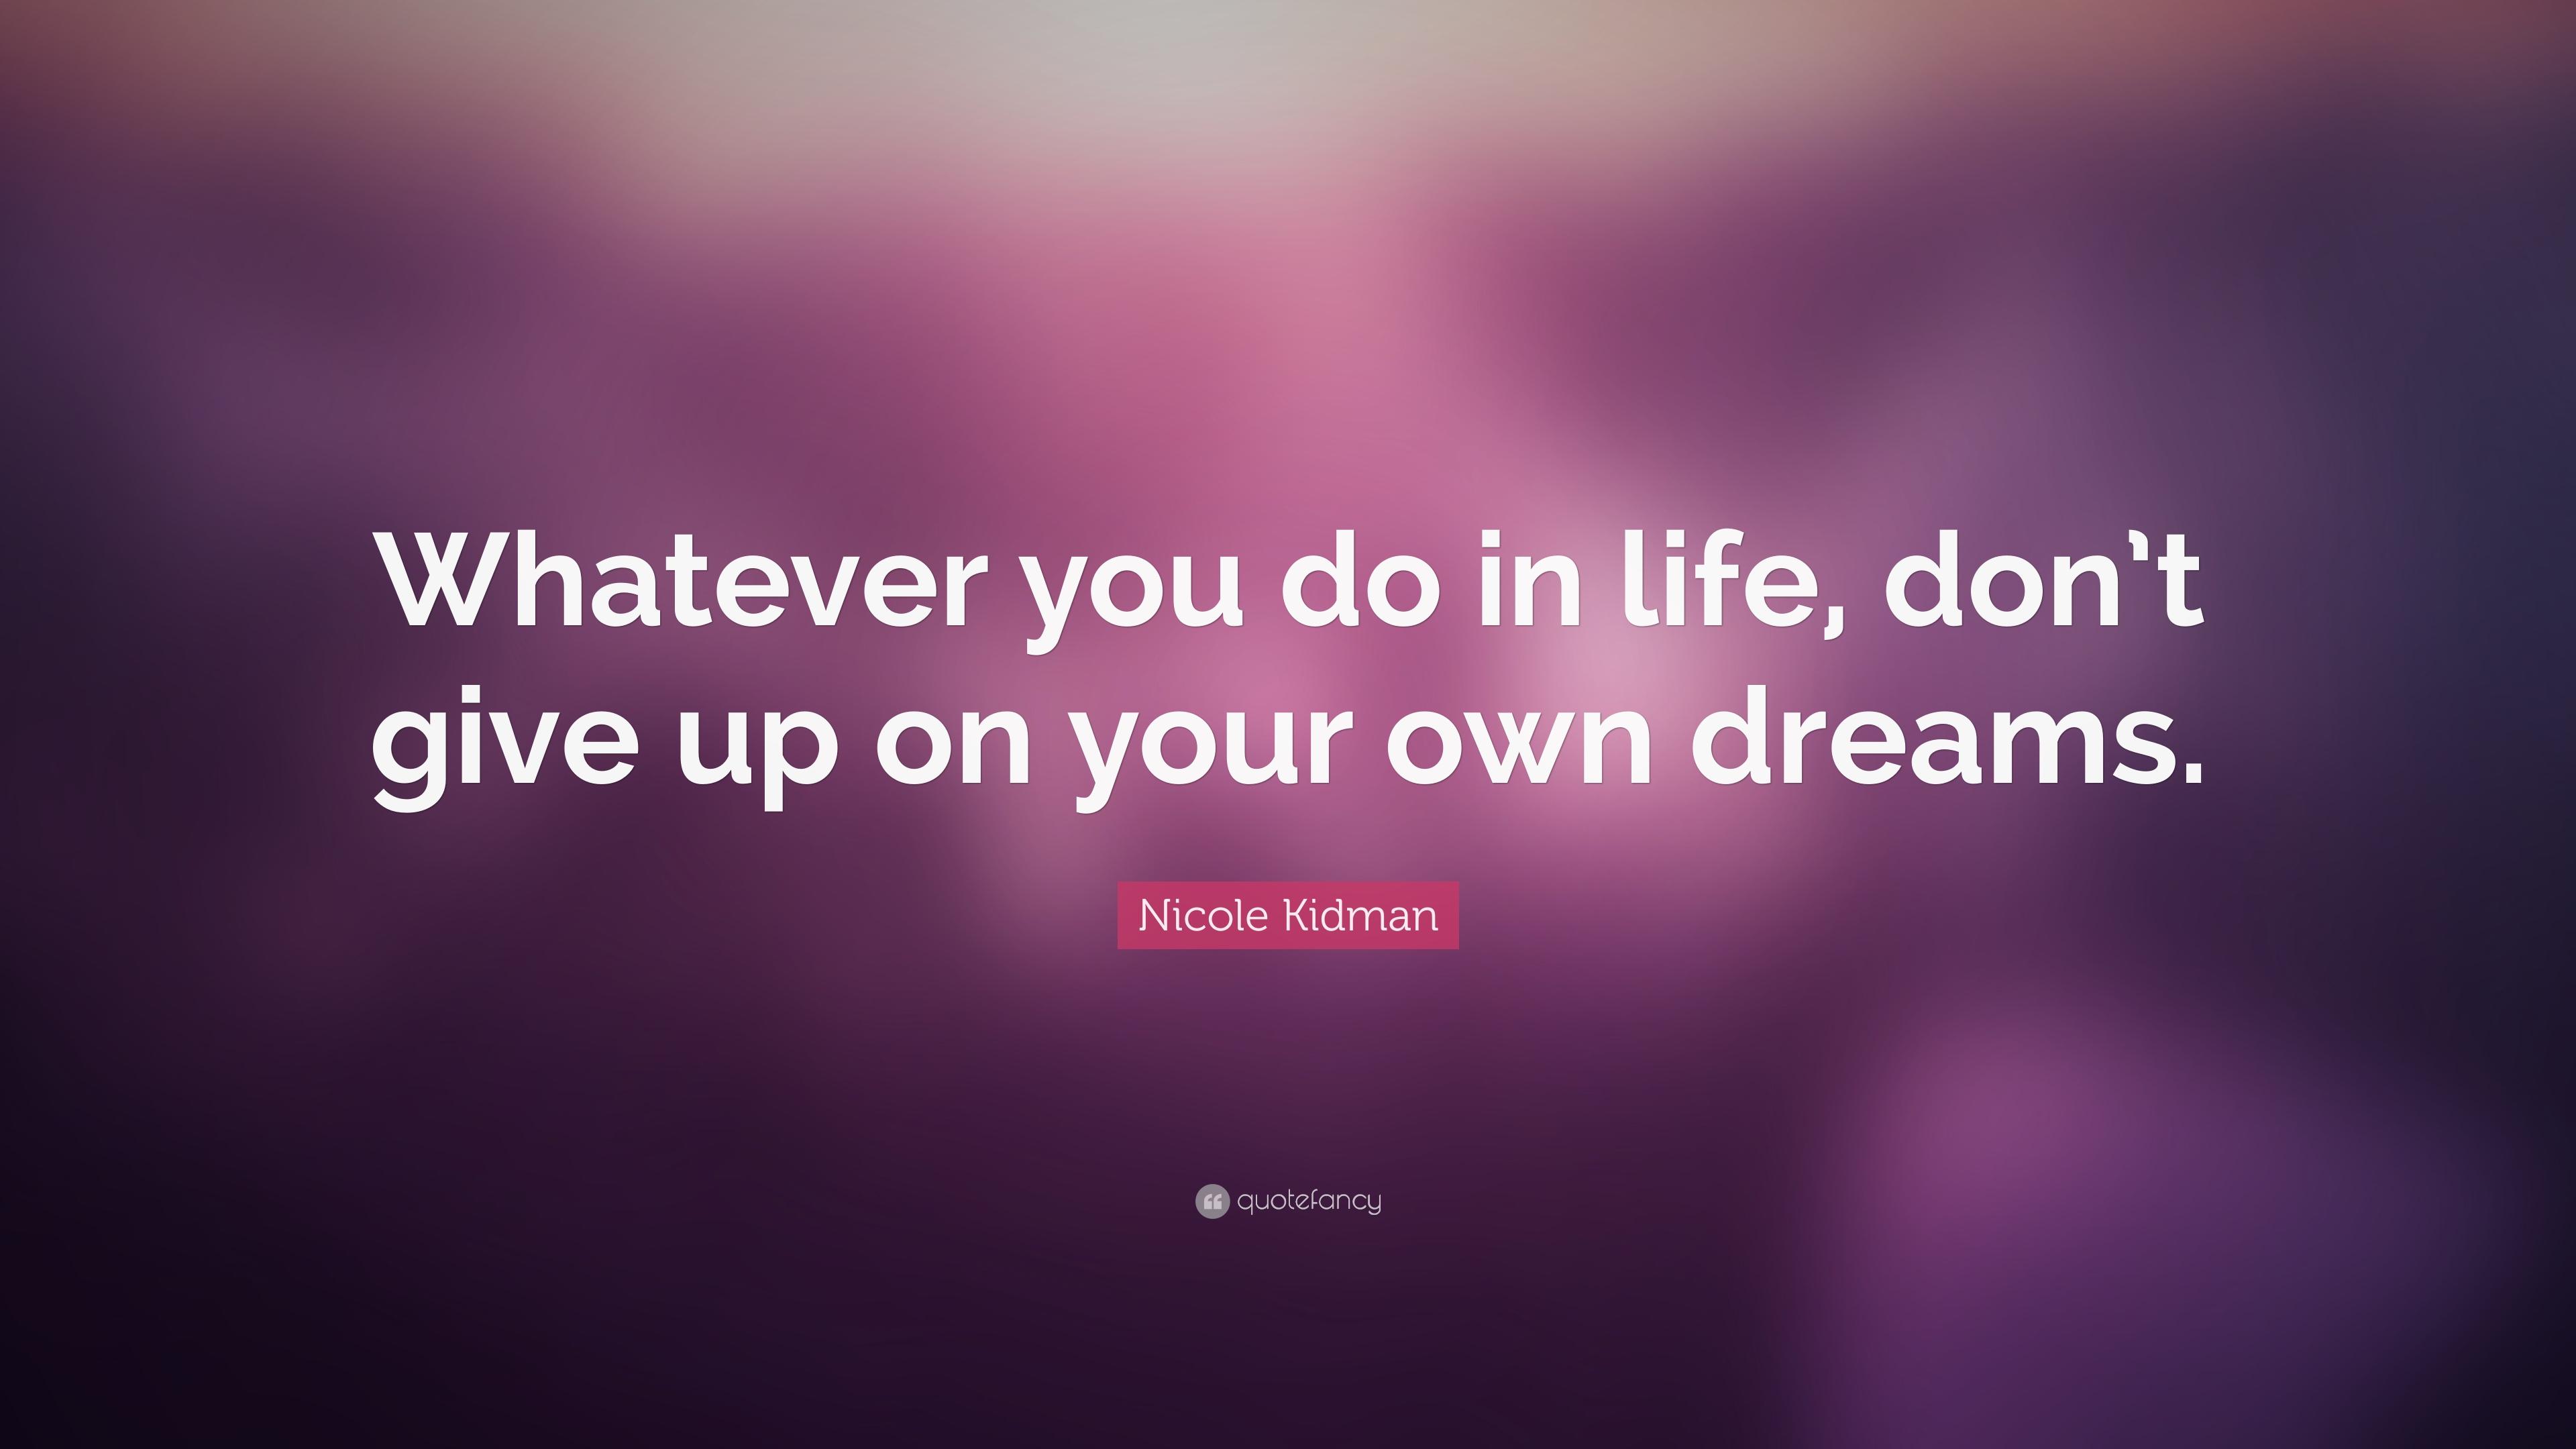 Nicole Kidman Quote: “Whatever you do in life, don't give up on your